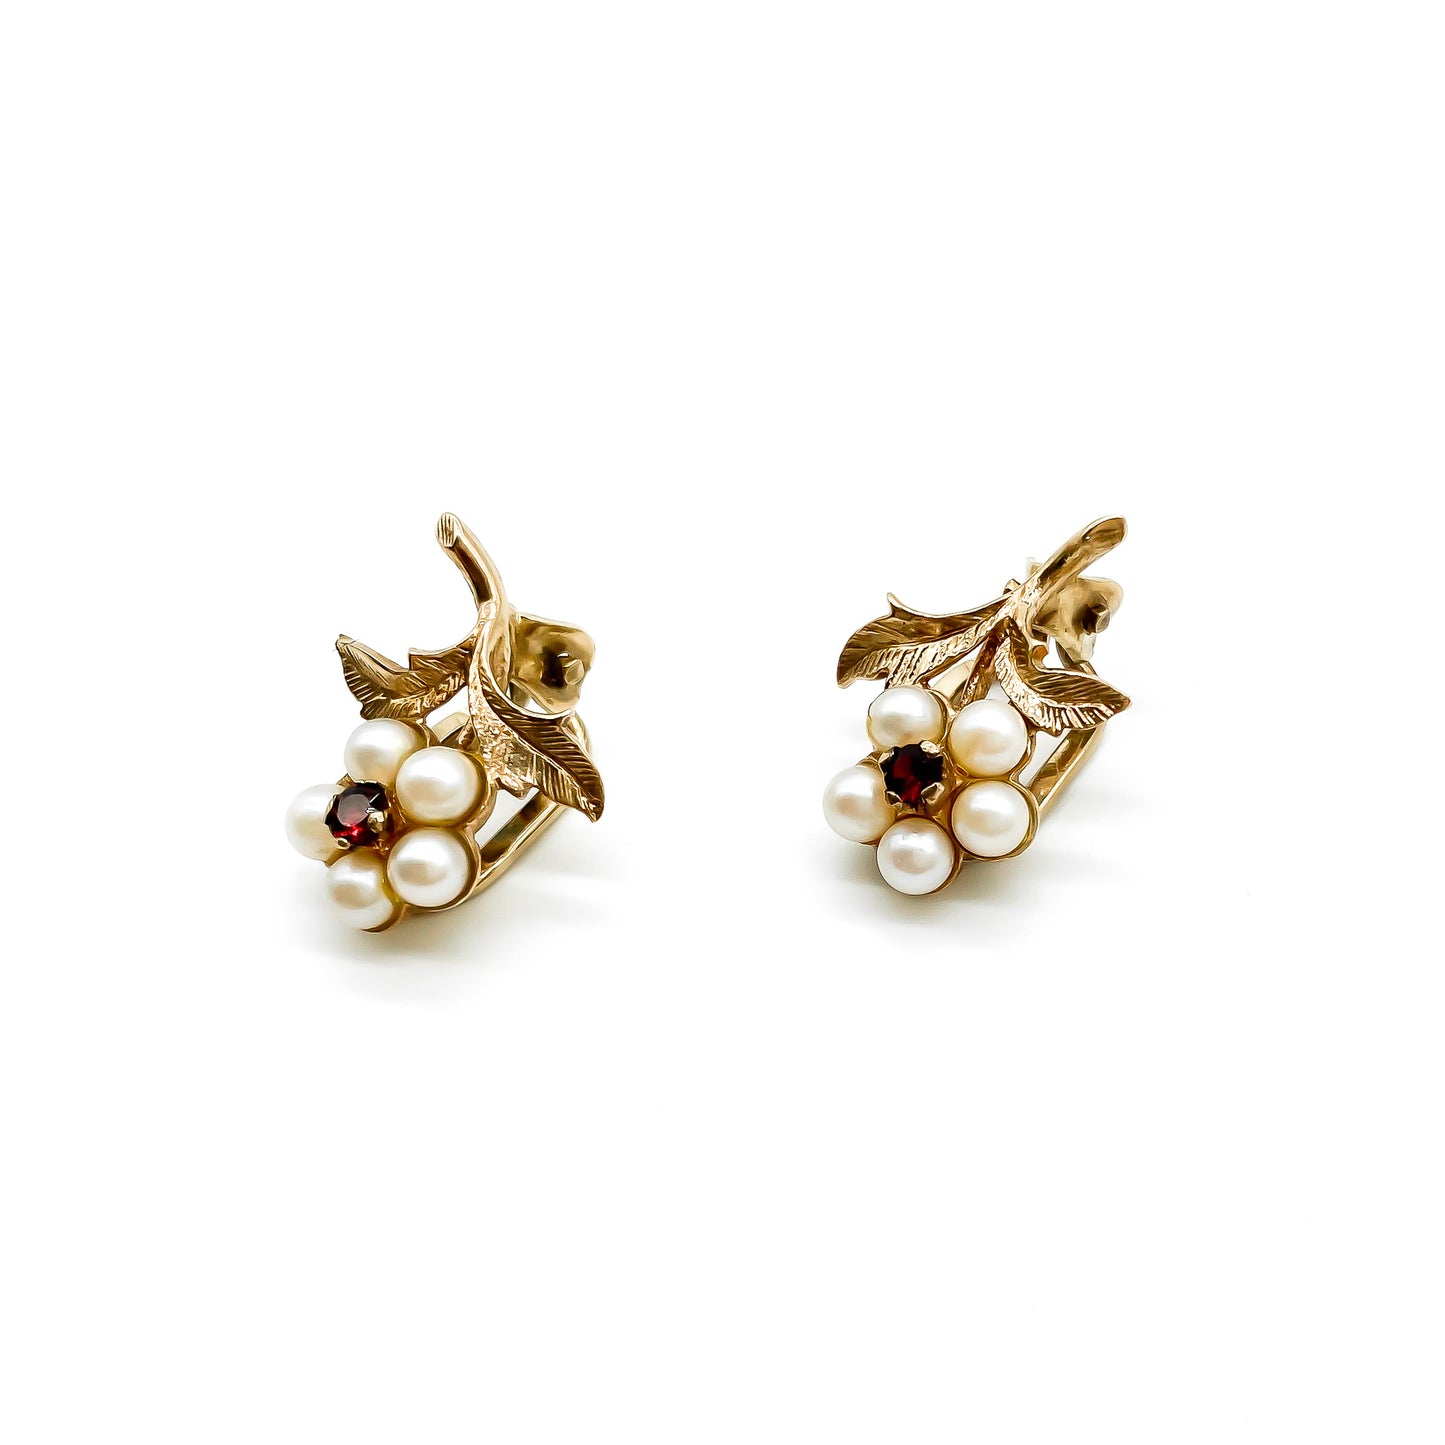 Pretty 9ct rose gold pearl and garnet flower shaped clip on vintage earrings.